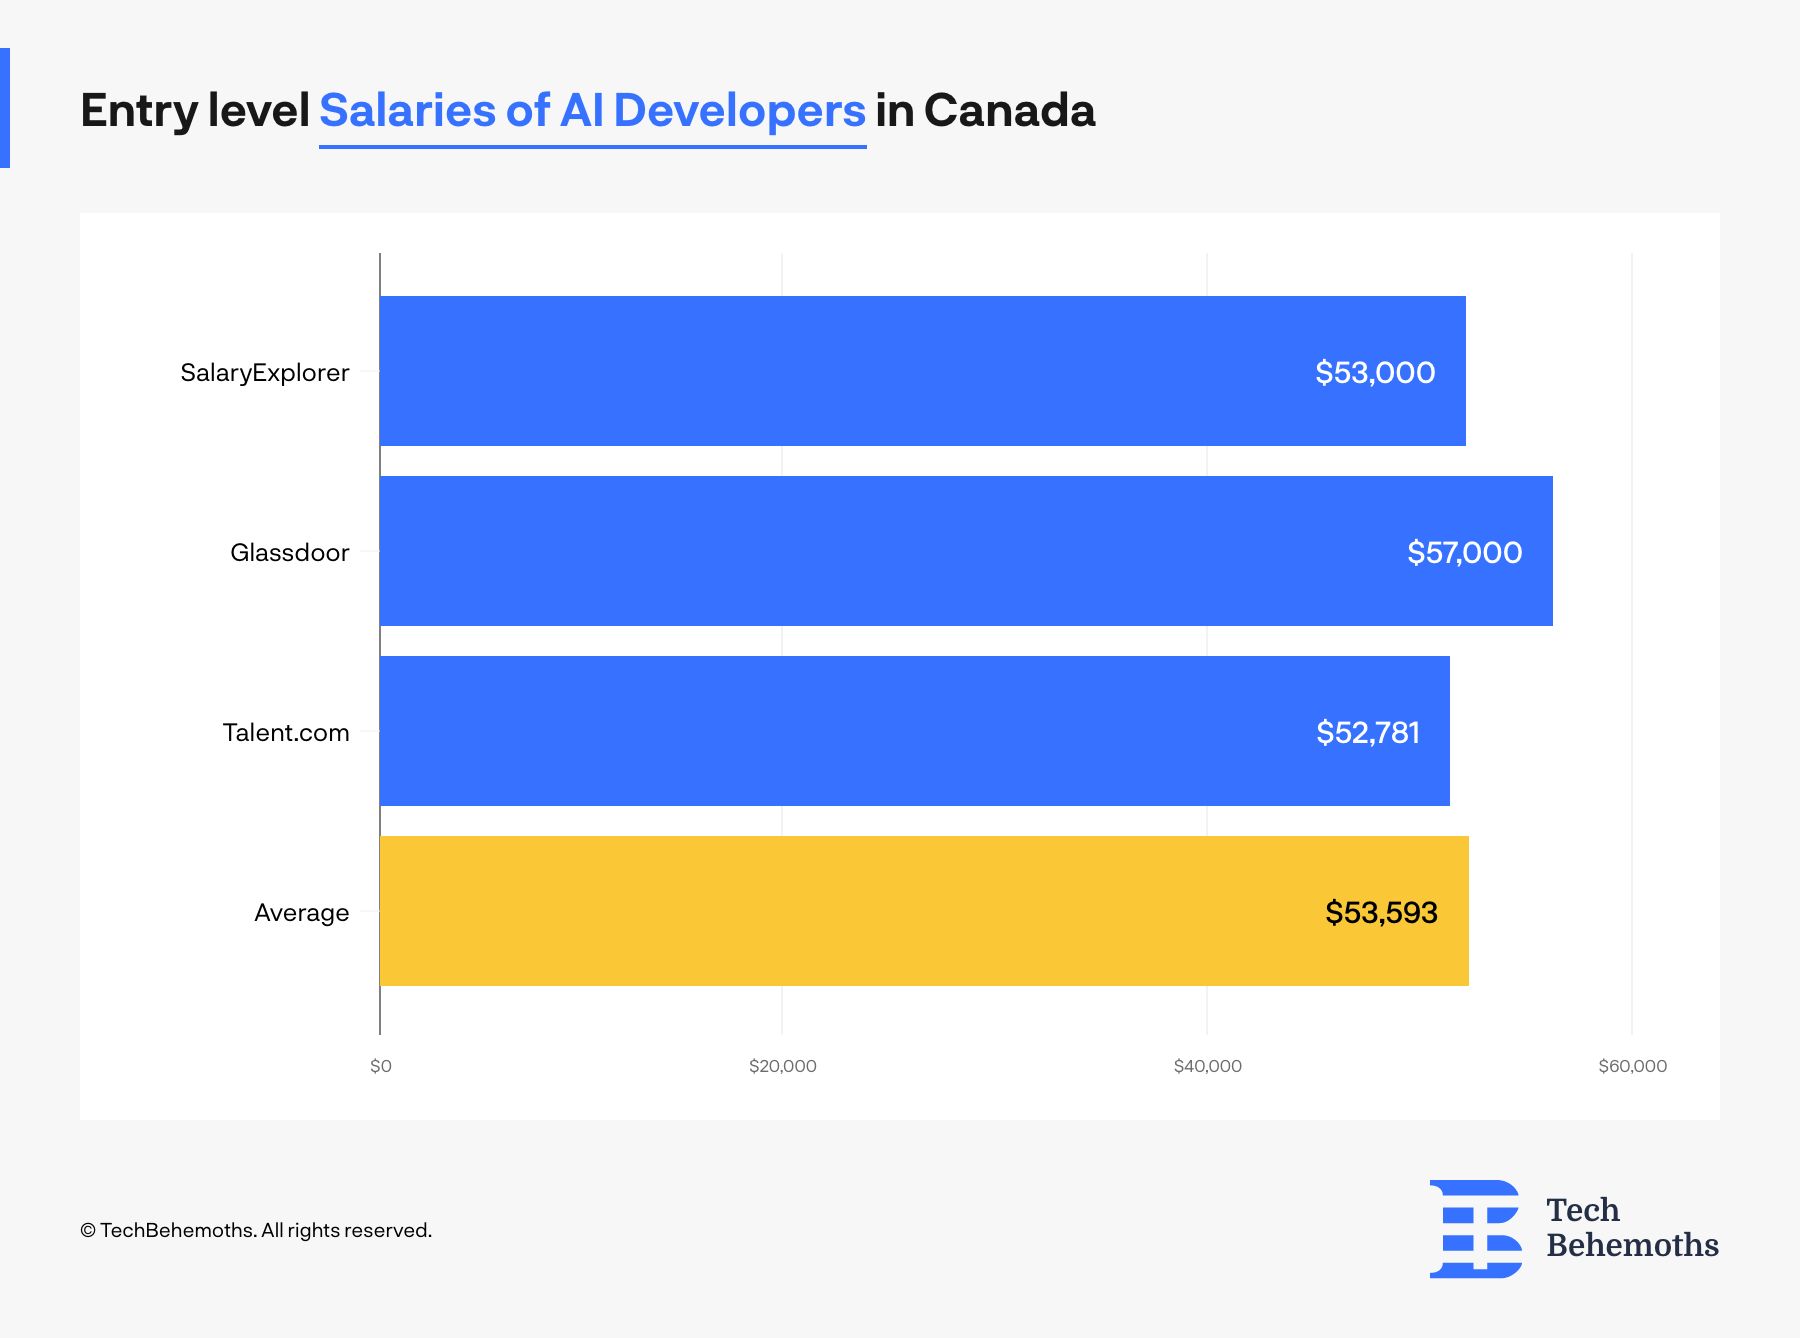 entry level salaries for Artificial Intelligence developers in Canada